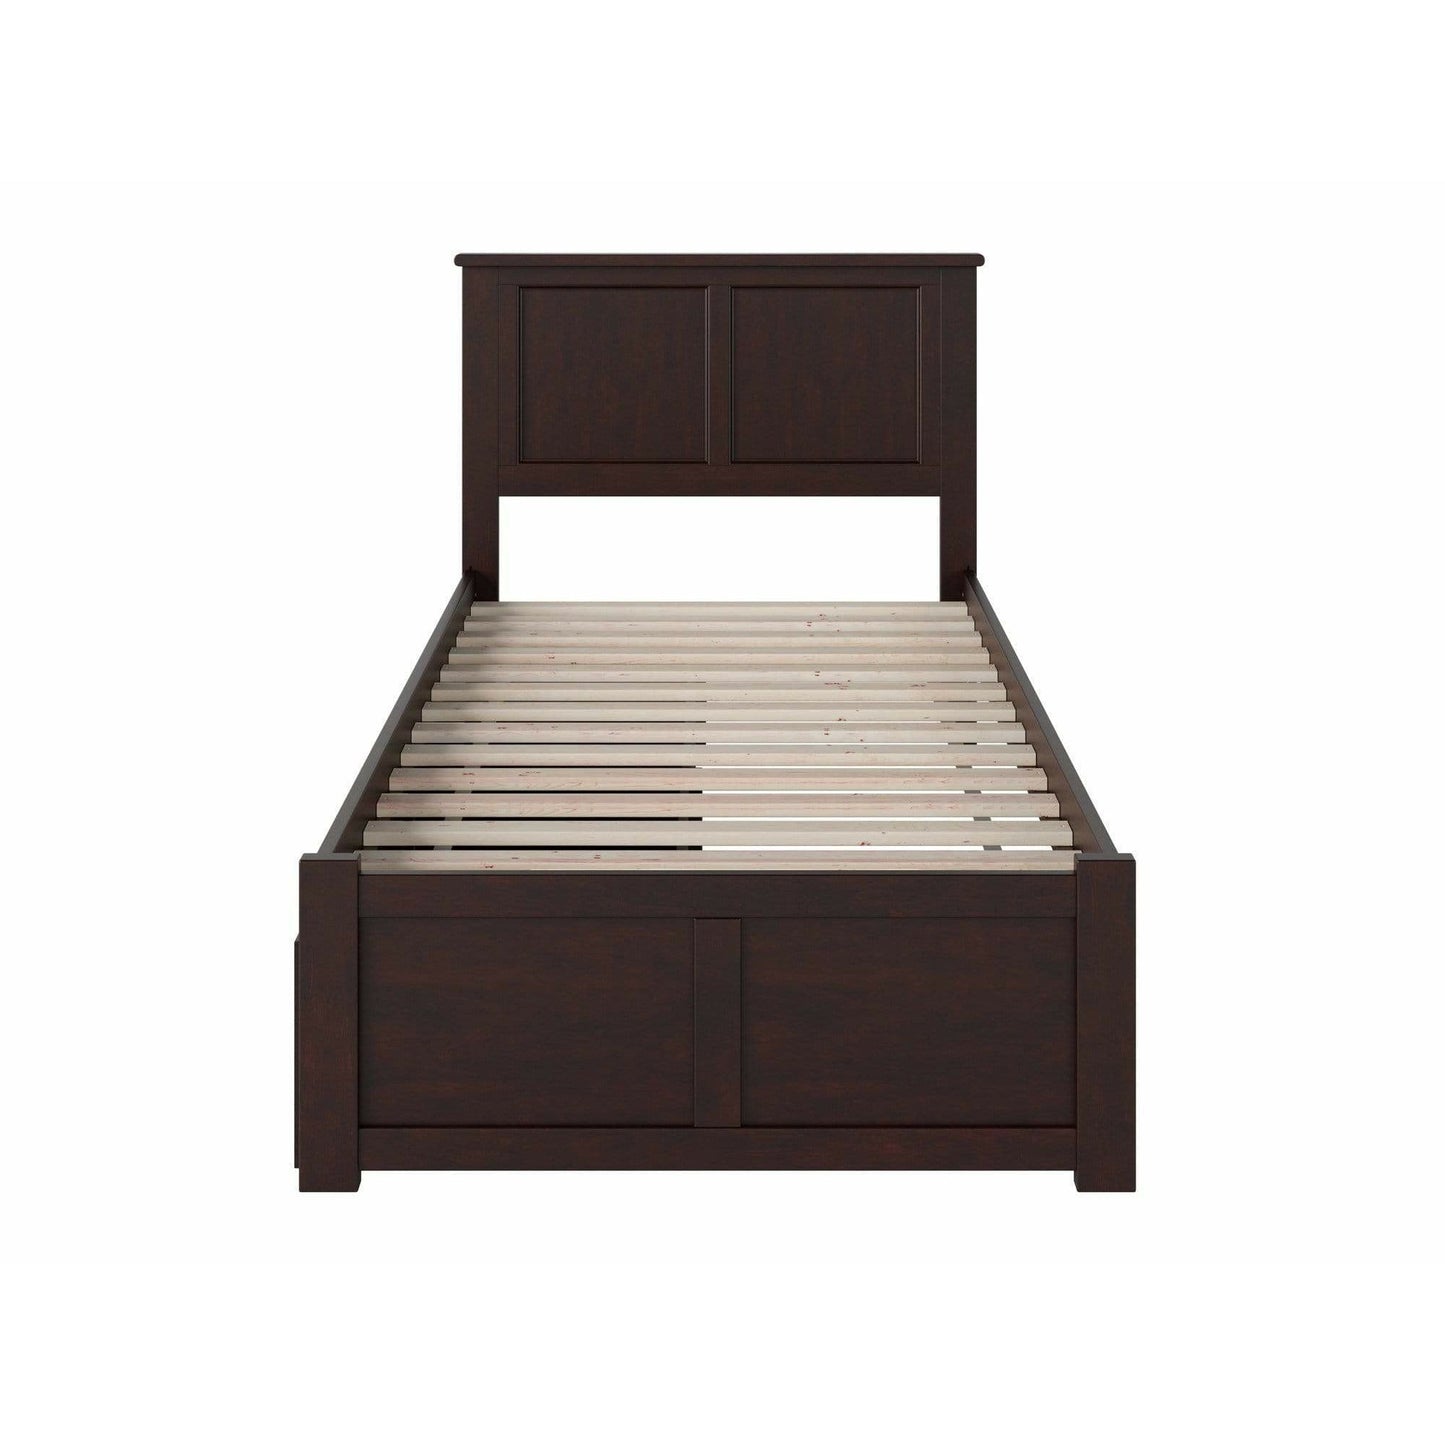 Atlantic Furniture Bed Madison Twin Platform Bed with Flat Panel Foot Board and 2 Urban Bed Drawers in Espresso